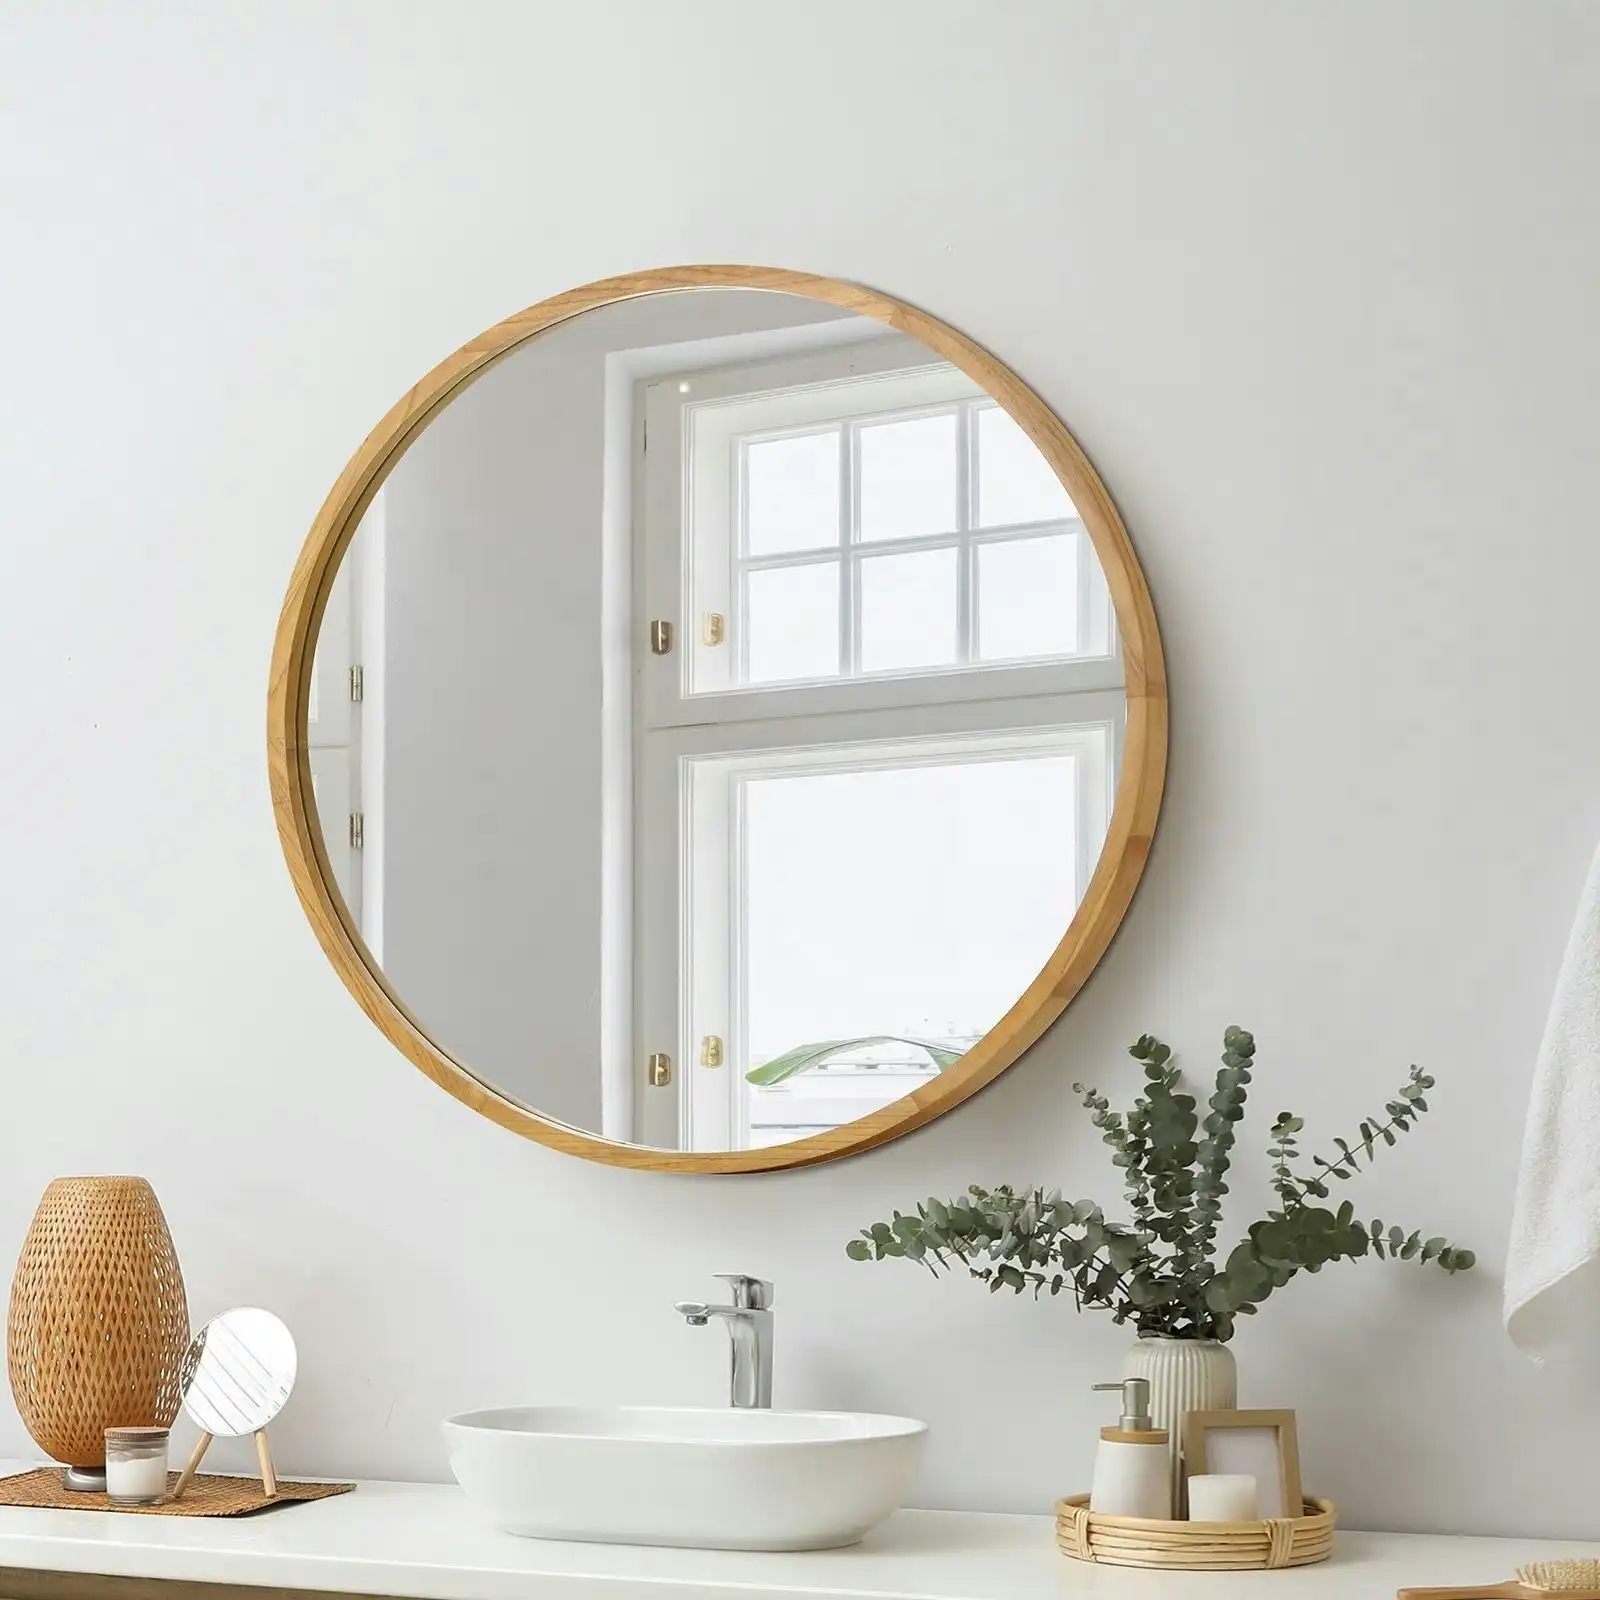 Oikiture 60cm Wall Mirrors Round Makeup Mirror Home Decro Wooden Dining Room